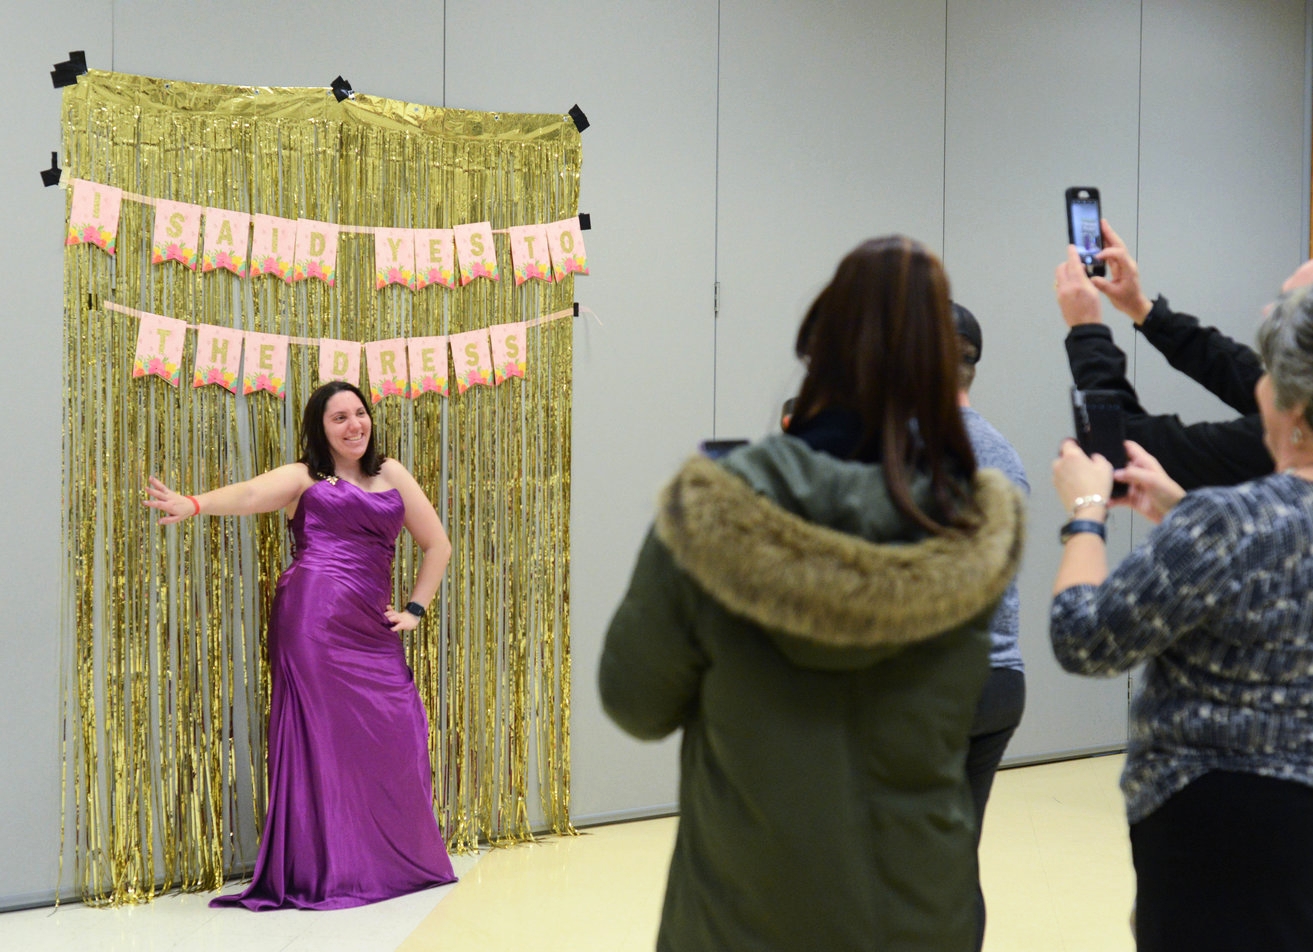  "Say Yes to the Dress" participant Jessica Cain, left, poses in front of a backdrop for a handful of photographers on Wednesday, Jan. 17, 2018 at the Activity and Recreation Center in Columbia, Mo. Cain tried on several dresses before settling on a 